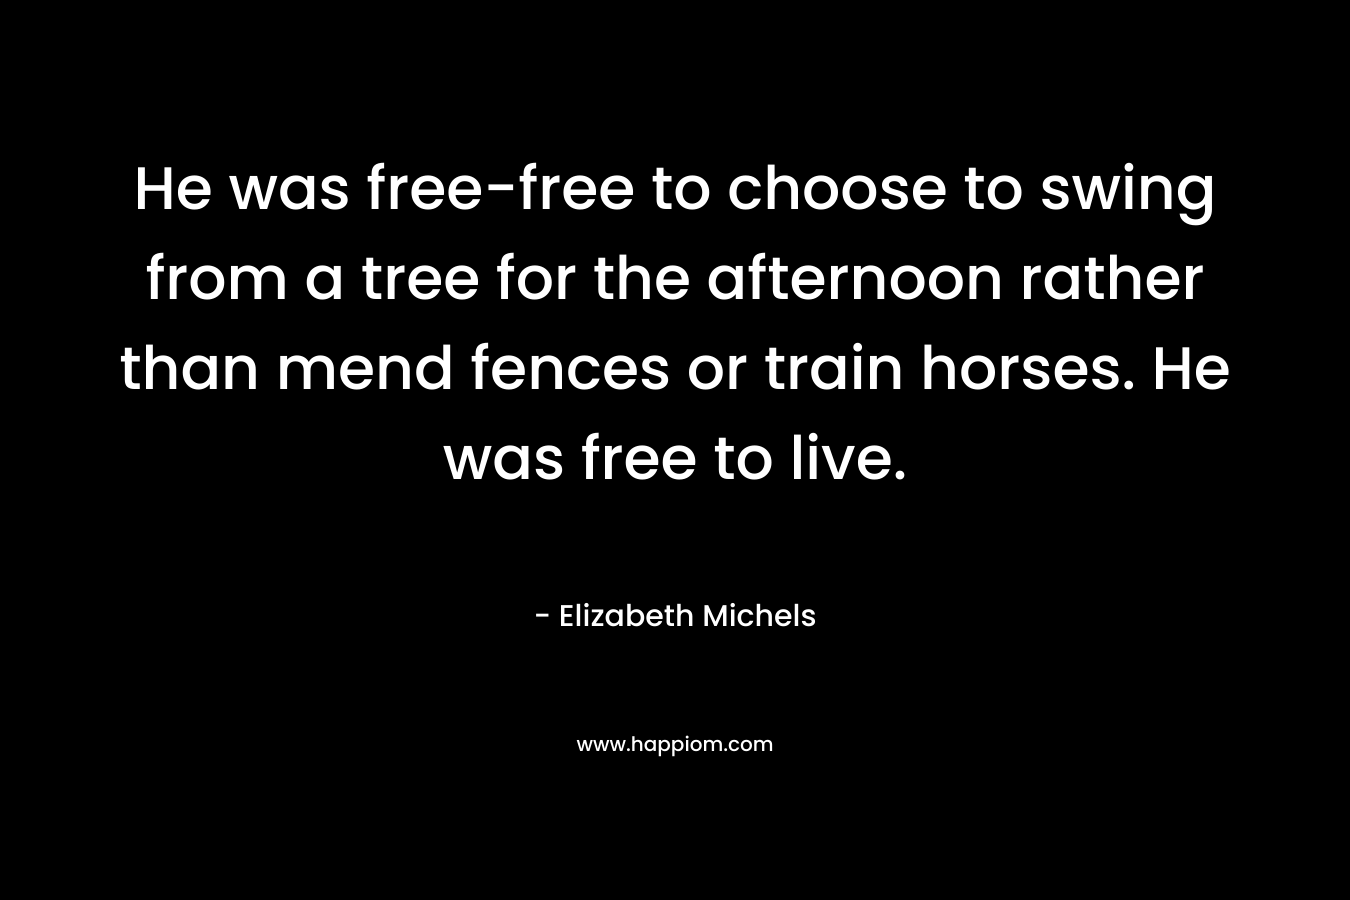 He was free-free to choose to swing from a tree for the afternoon rather than mend fences or train horses. He was free to live. – Elizabeth Michels